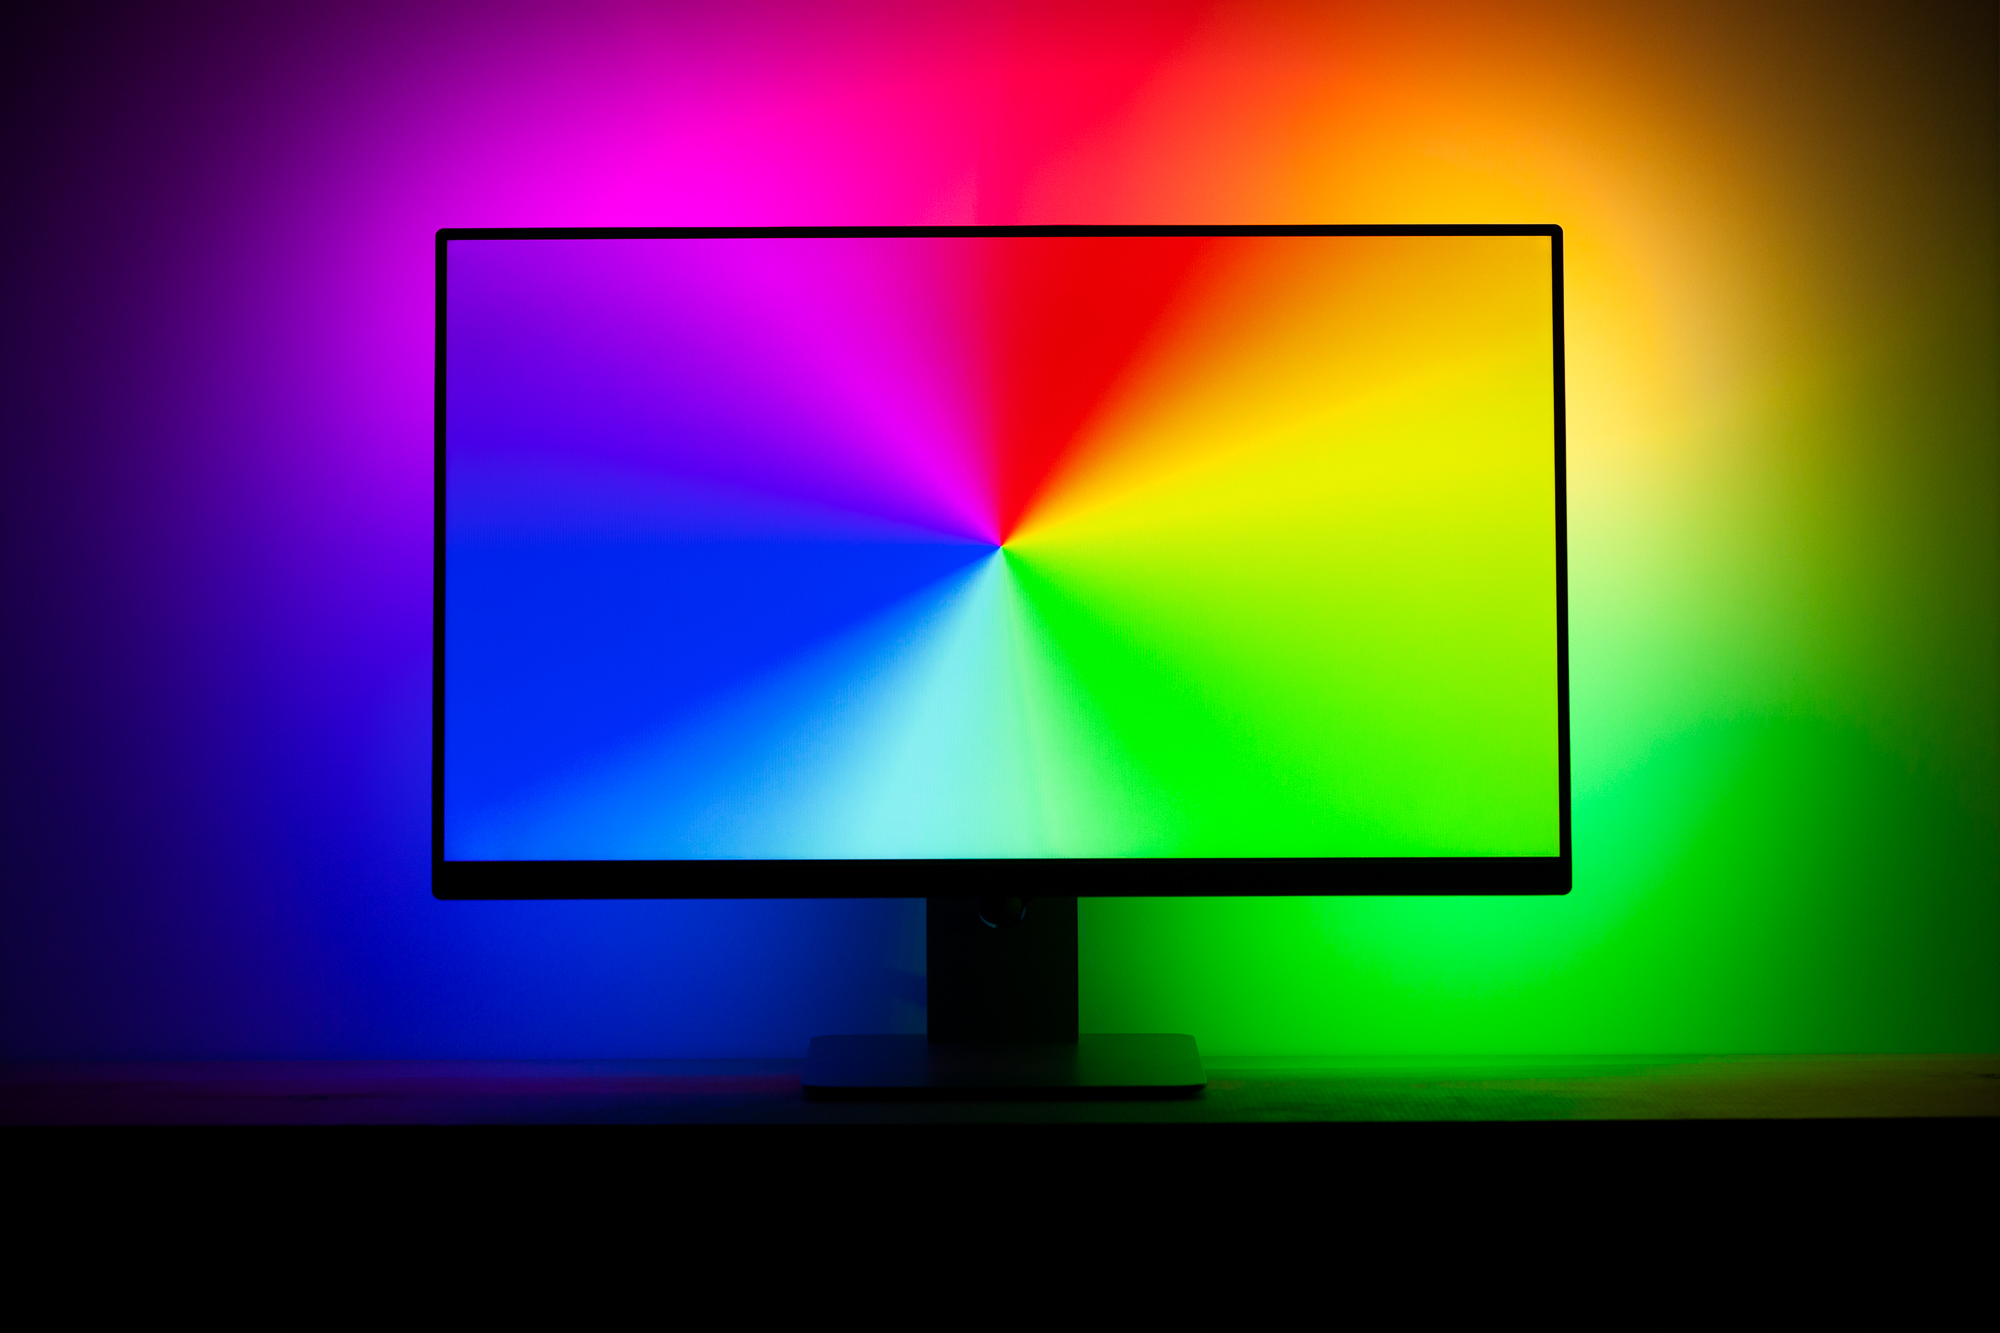 How to Make Your Own DIY Ambilight for Under $60